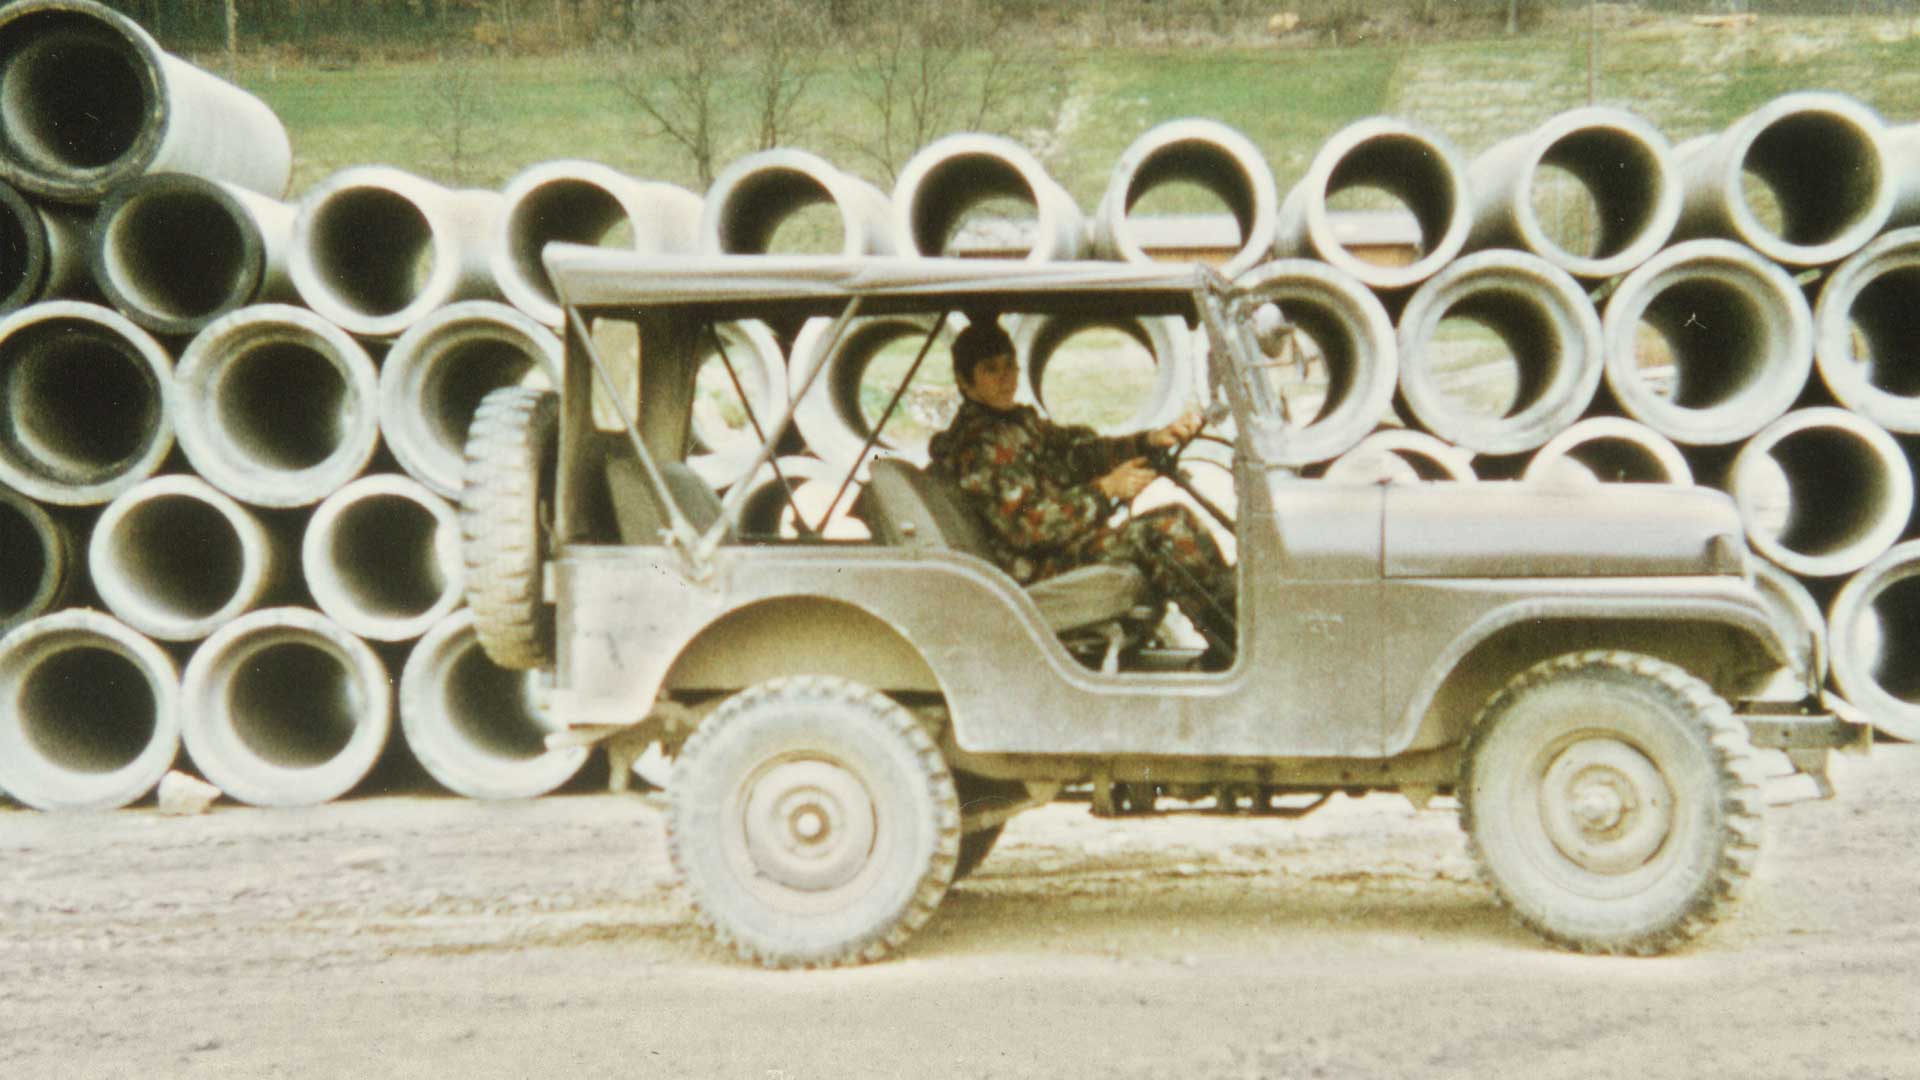 GS at the Swiss Army (1975).